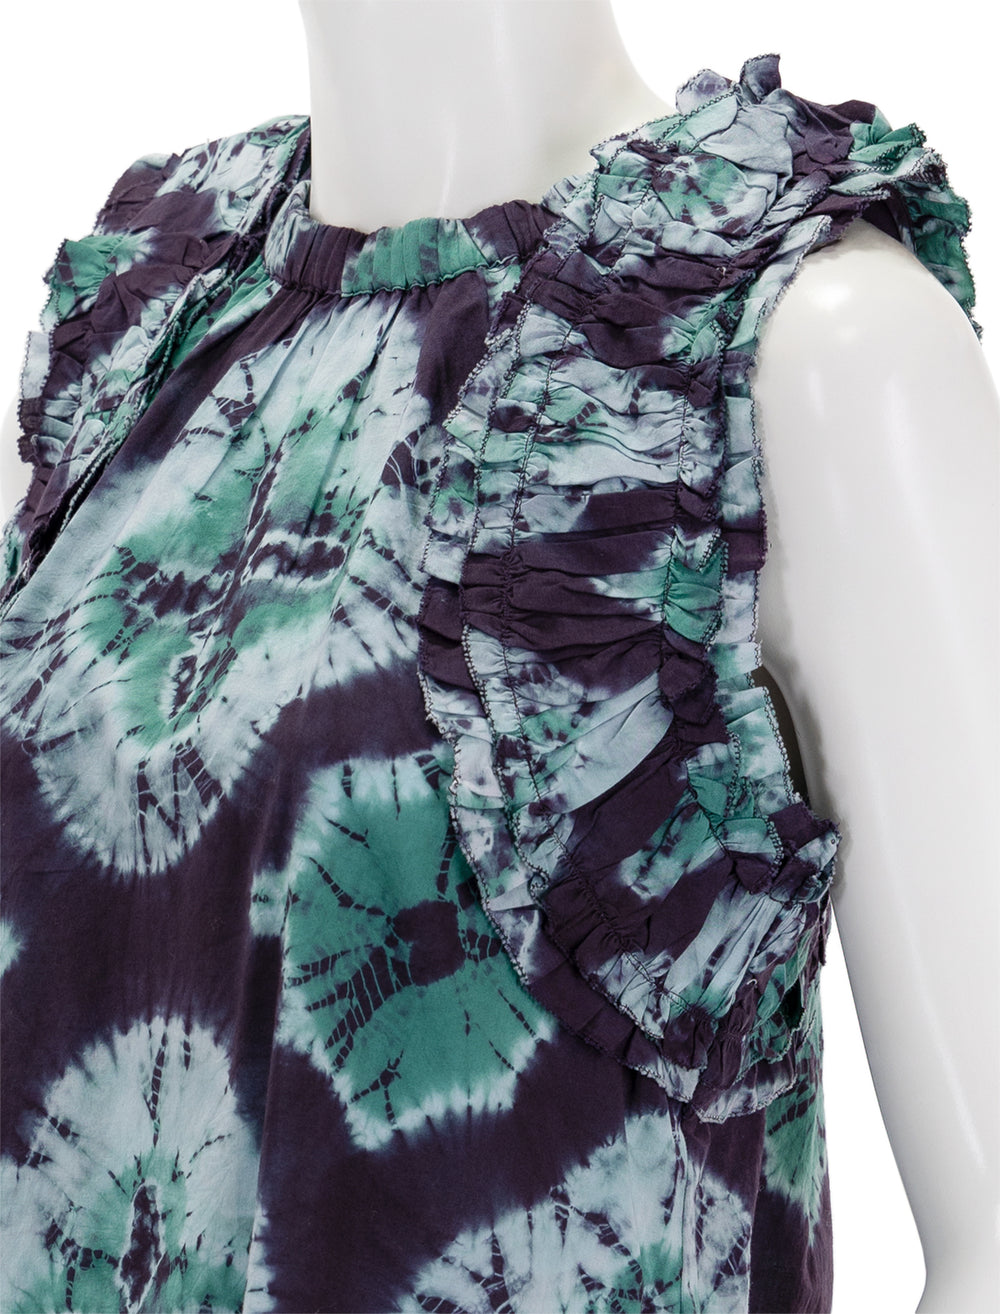 Close-up view of Sea NY's Aveline Tie Dye Print Pintucked Tank Top in Teal.